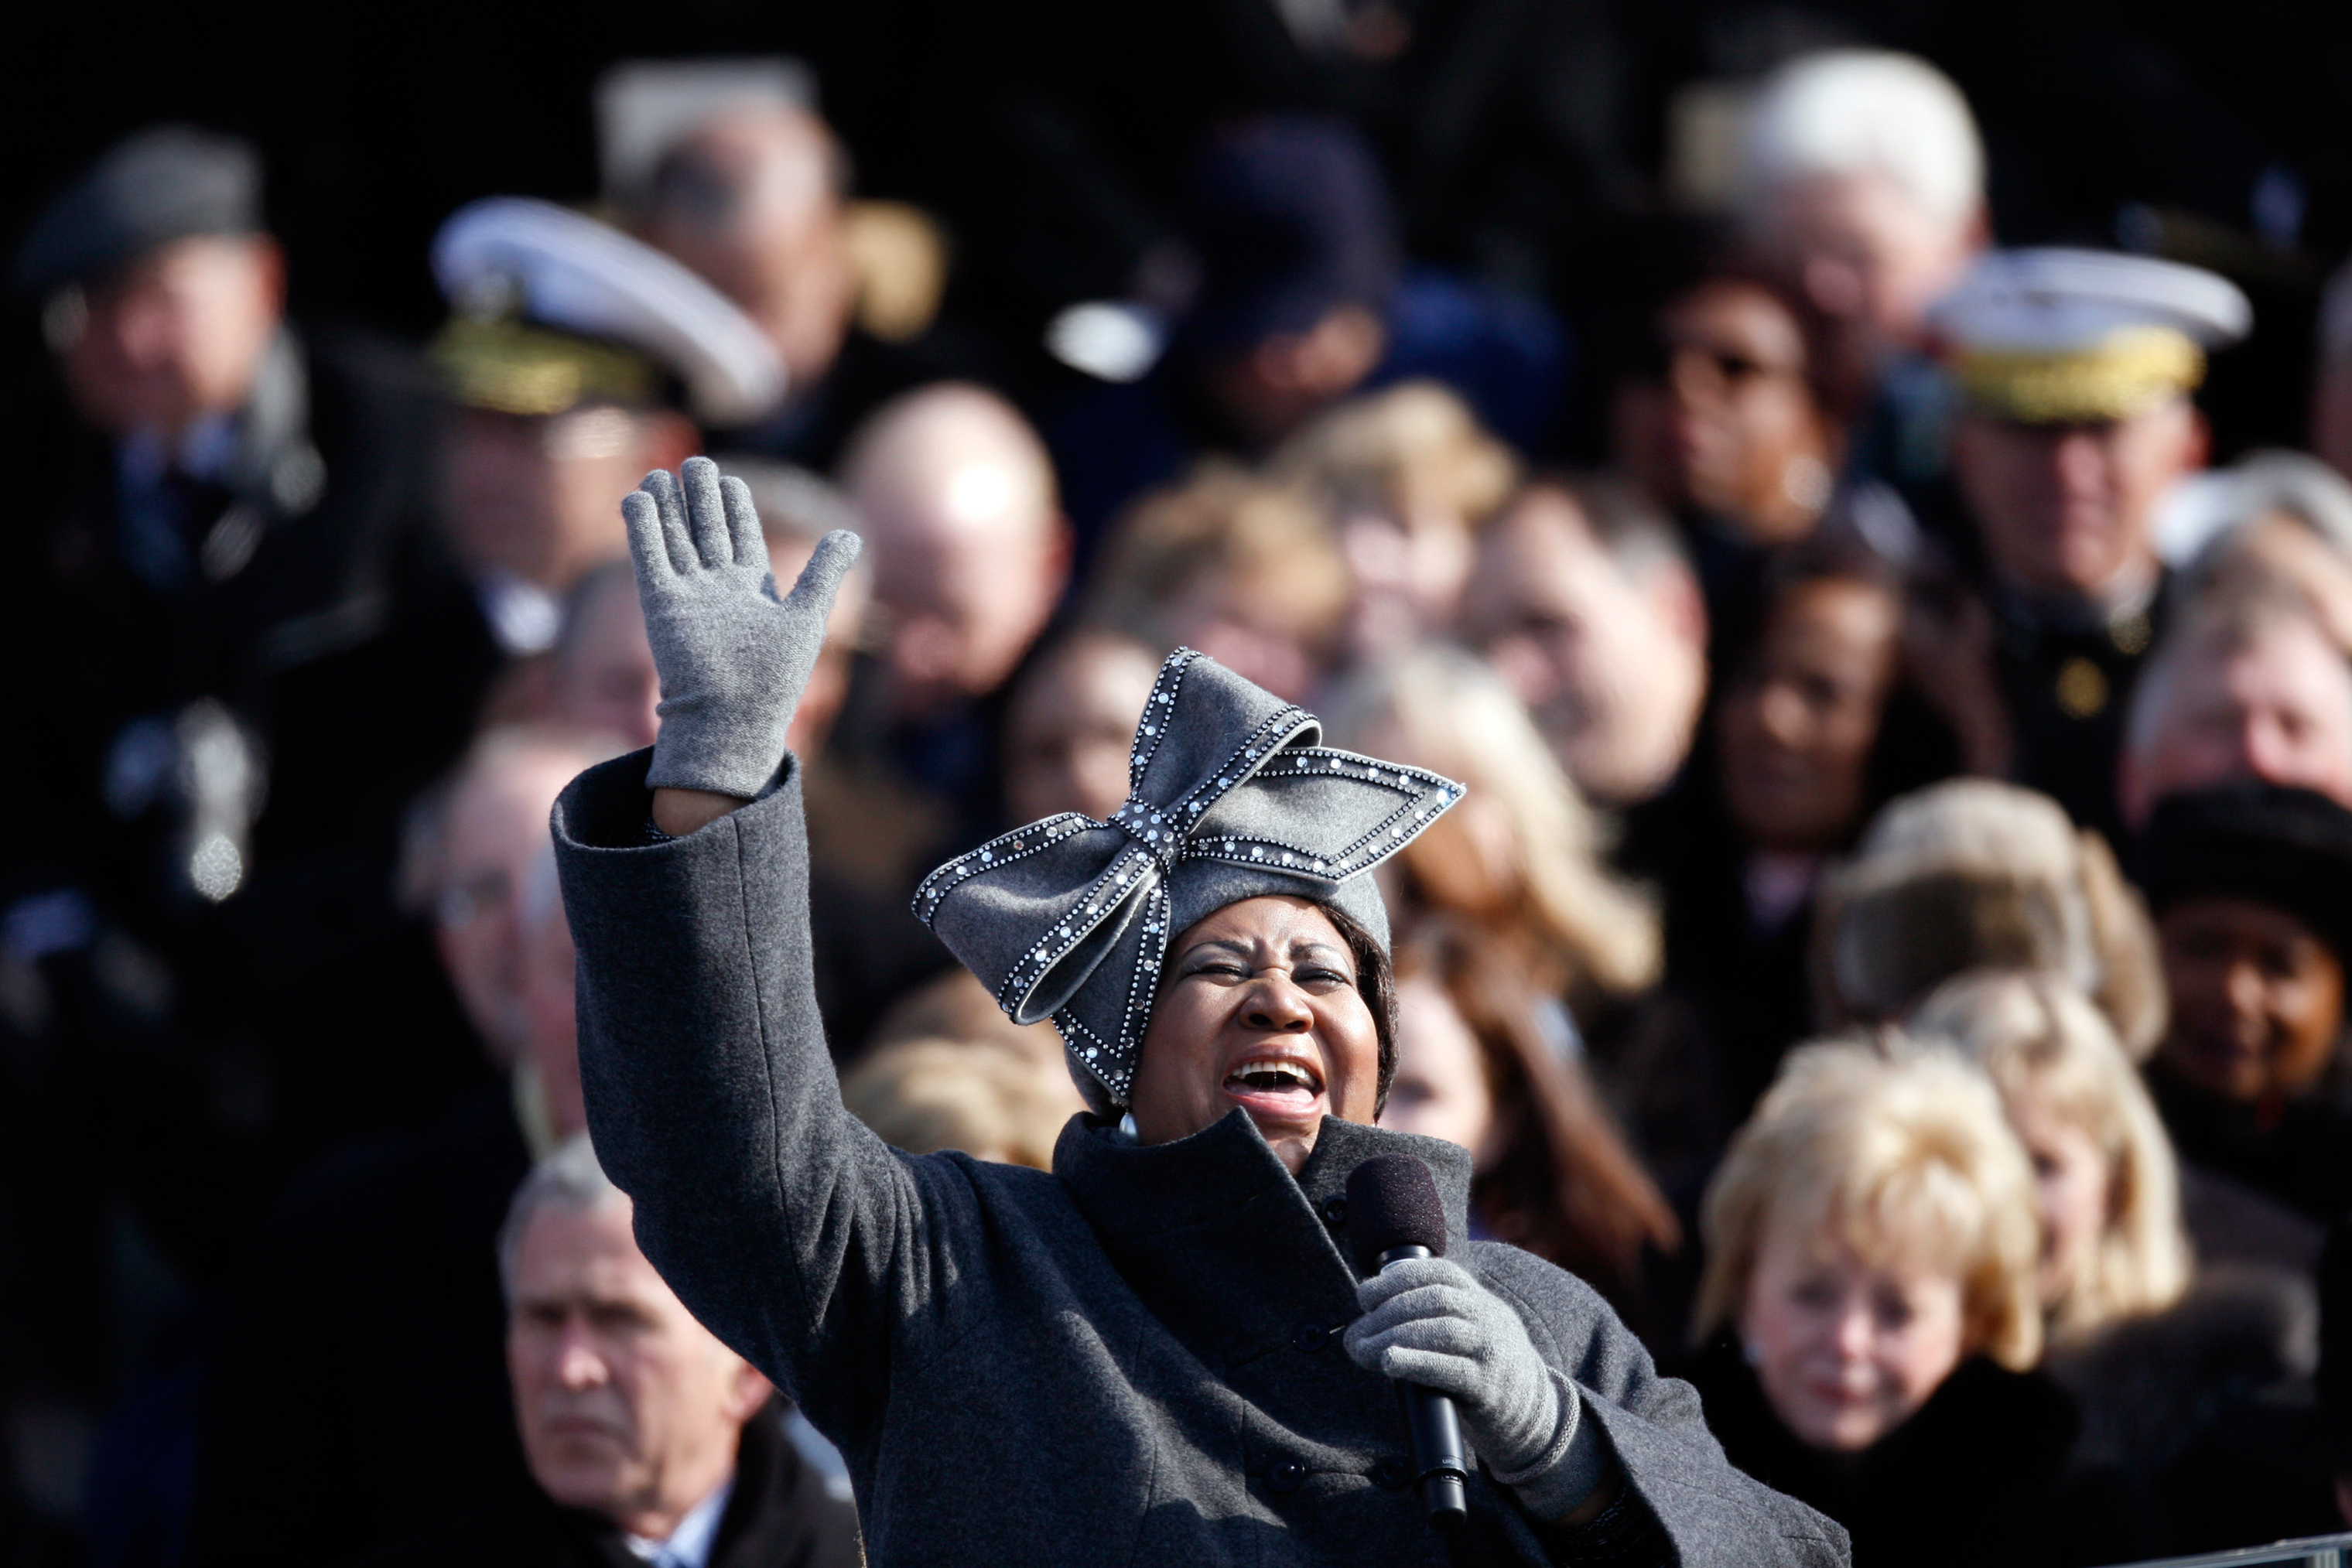 Aretha Franklin sings at the inauguration of President Barack Obama in Washington, D.C. on Jan. 20, 2009. (Damon Winter—The New York Times/Redux)